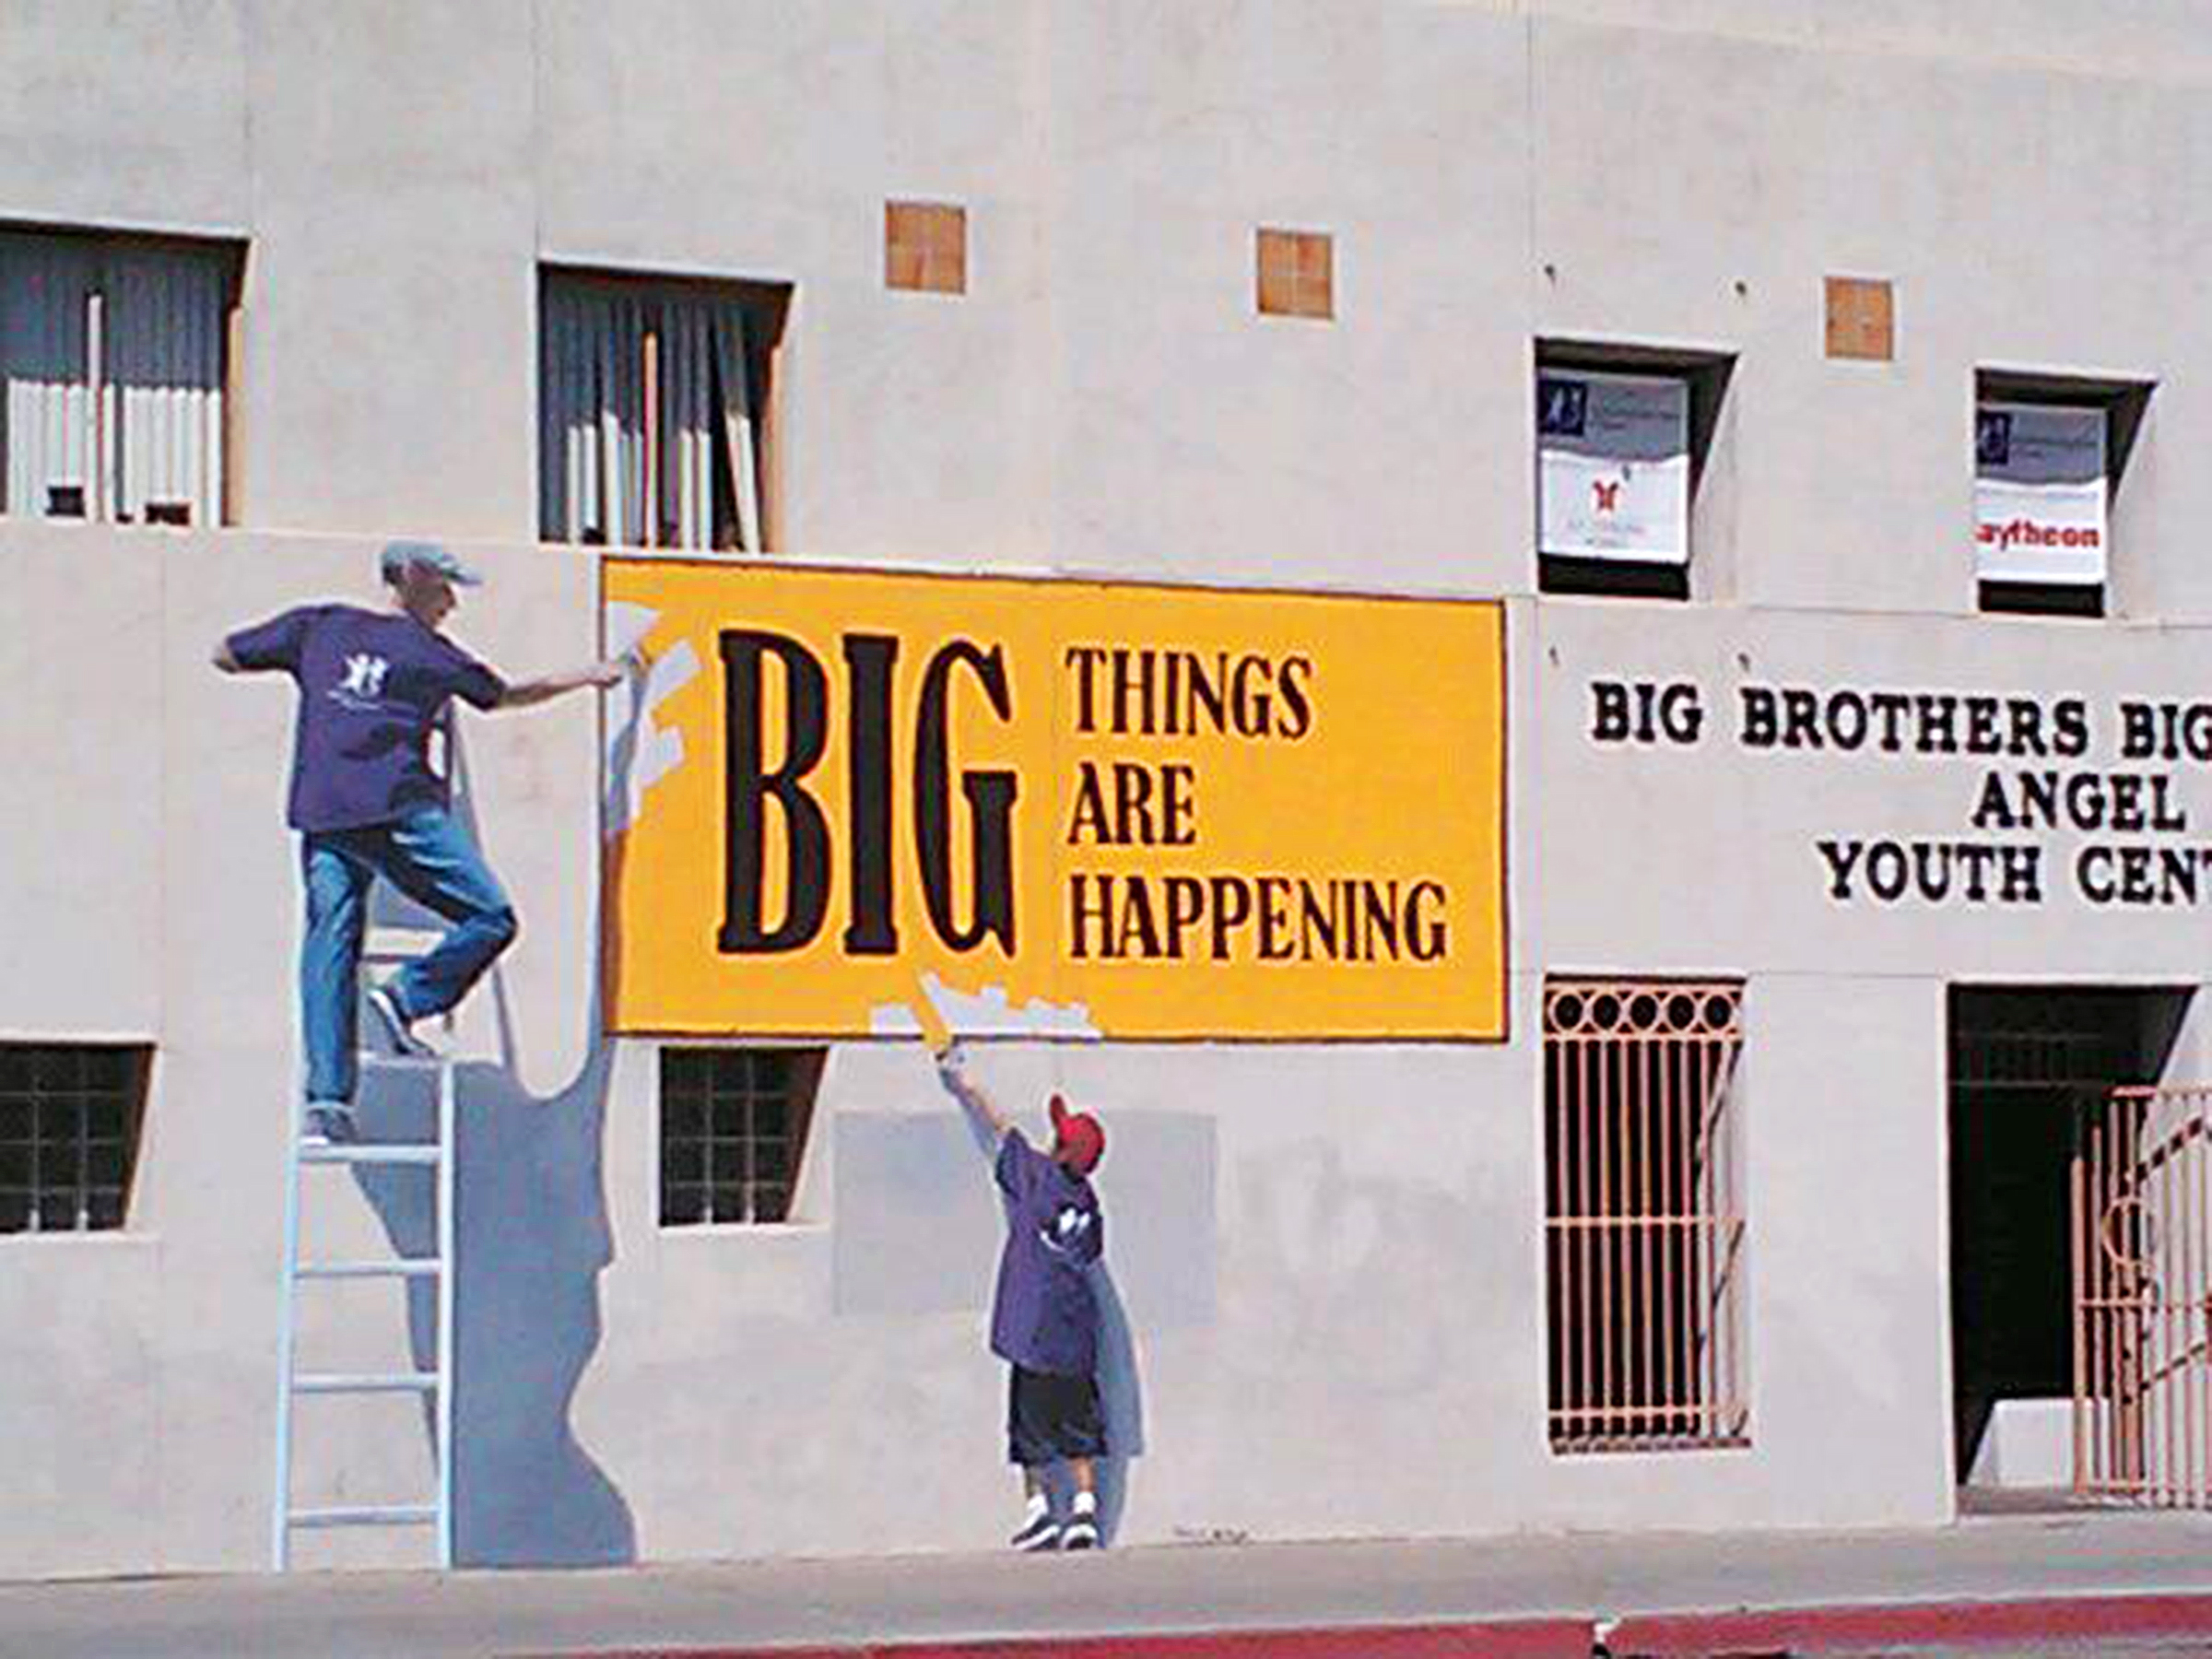 Allison Miller's mural at Big Brothers Big Sisters in Tucson